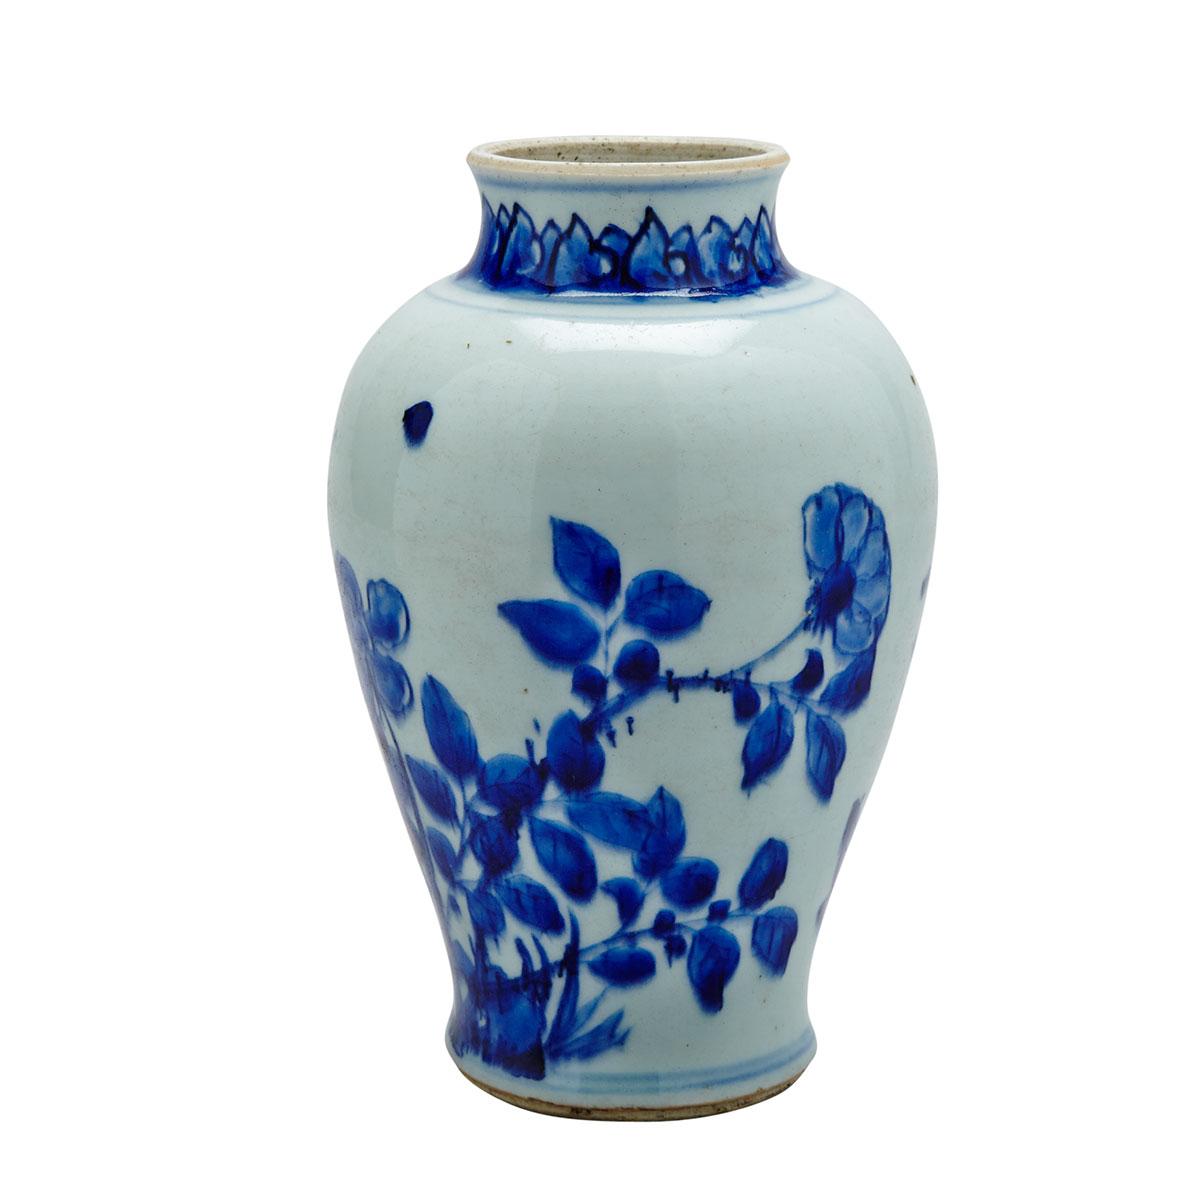 Blue and White Ovoid Jar, Transitional Period, 17th Century